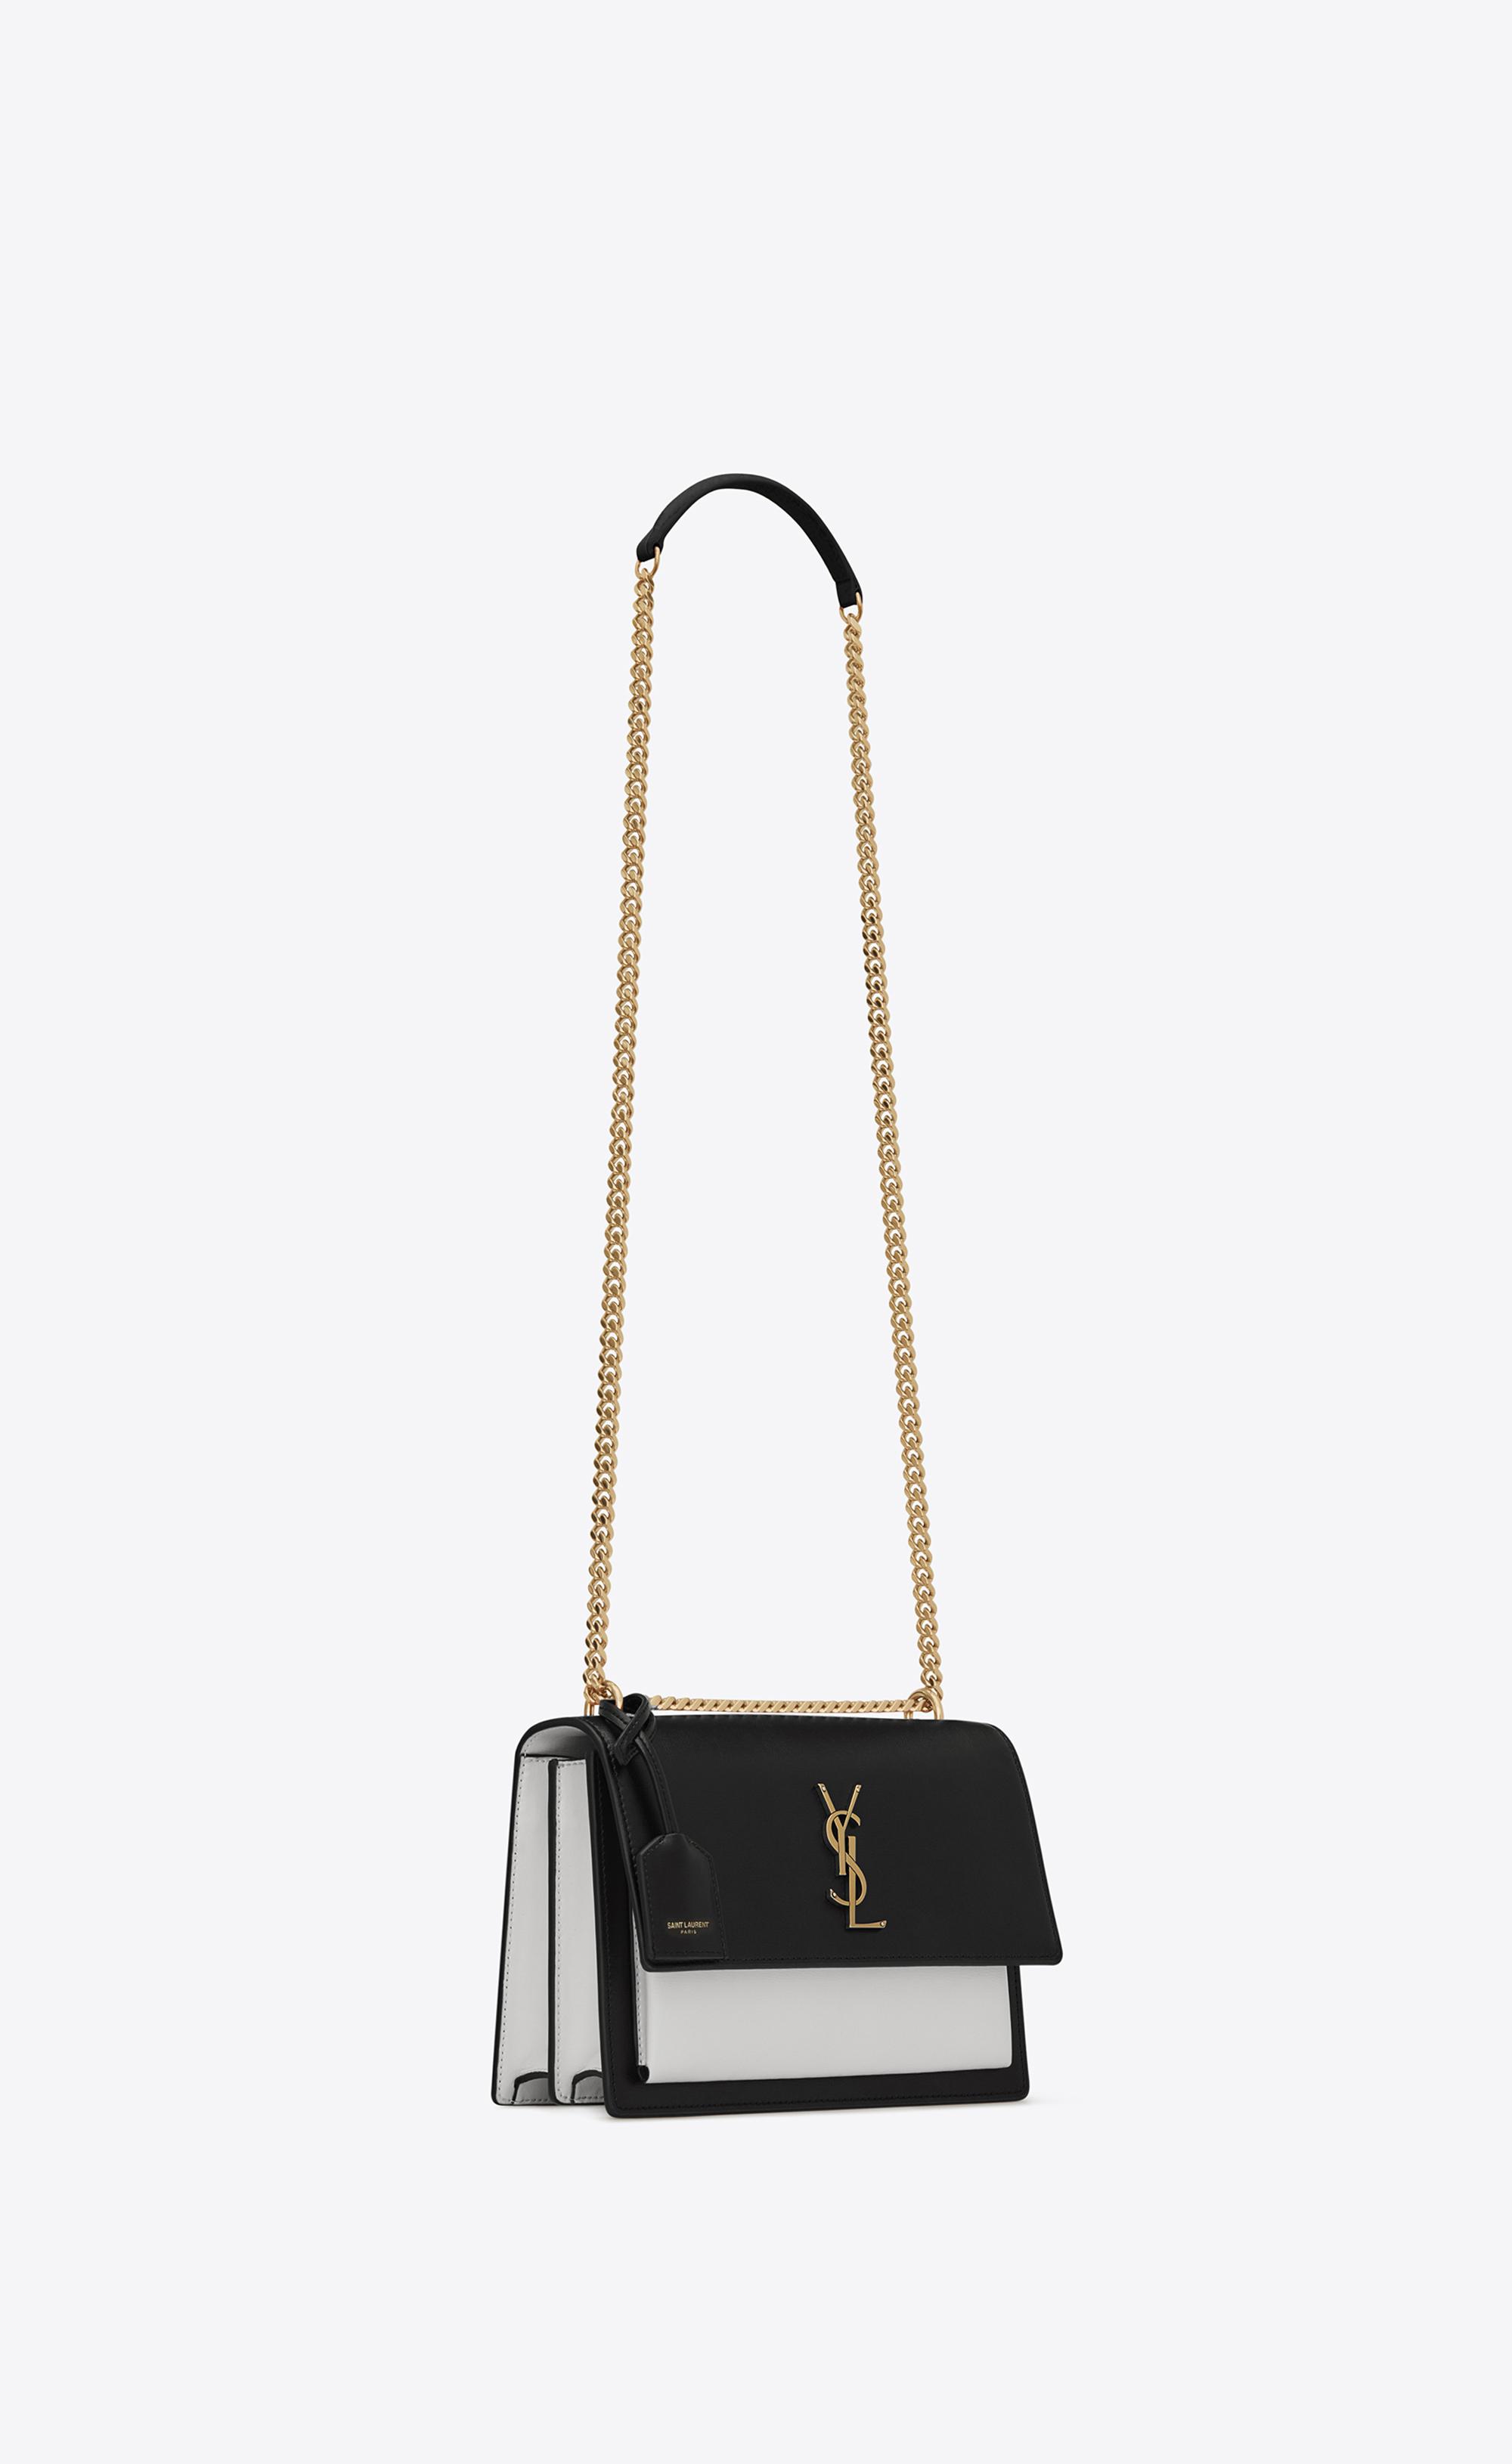 Saint Laurent Medium Sunset Bag In Black And Pearl White Leather | Lyst